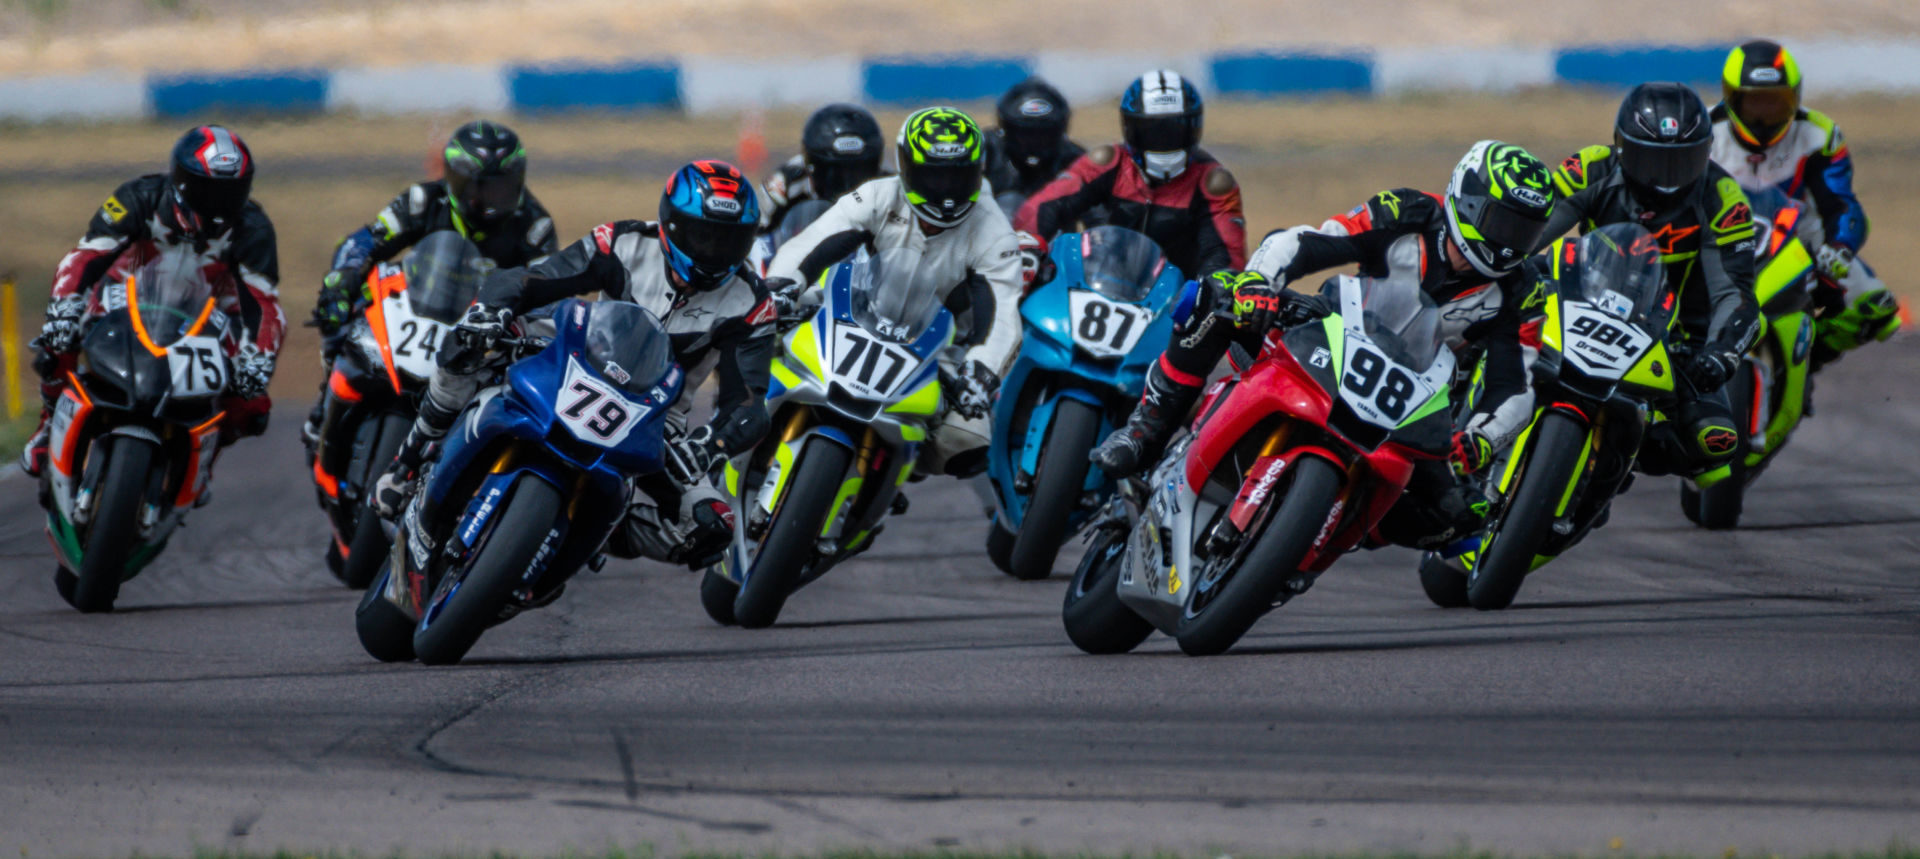 James Wilkerson (98), Mike Applegate (79), Ray Thornton (717), Phillip Hergenrader (87), Nick Dremel (984), and Casey Smith (75) charge into Turn One at the start of the MRA Race of the Rockies race at High Plains Raceway. Photo by Kelly Vernell, courtesy MRA.